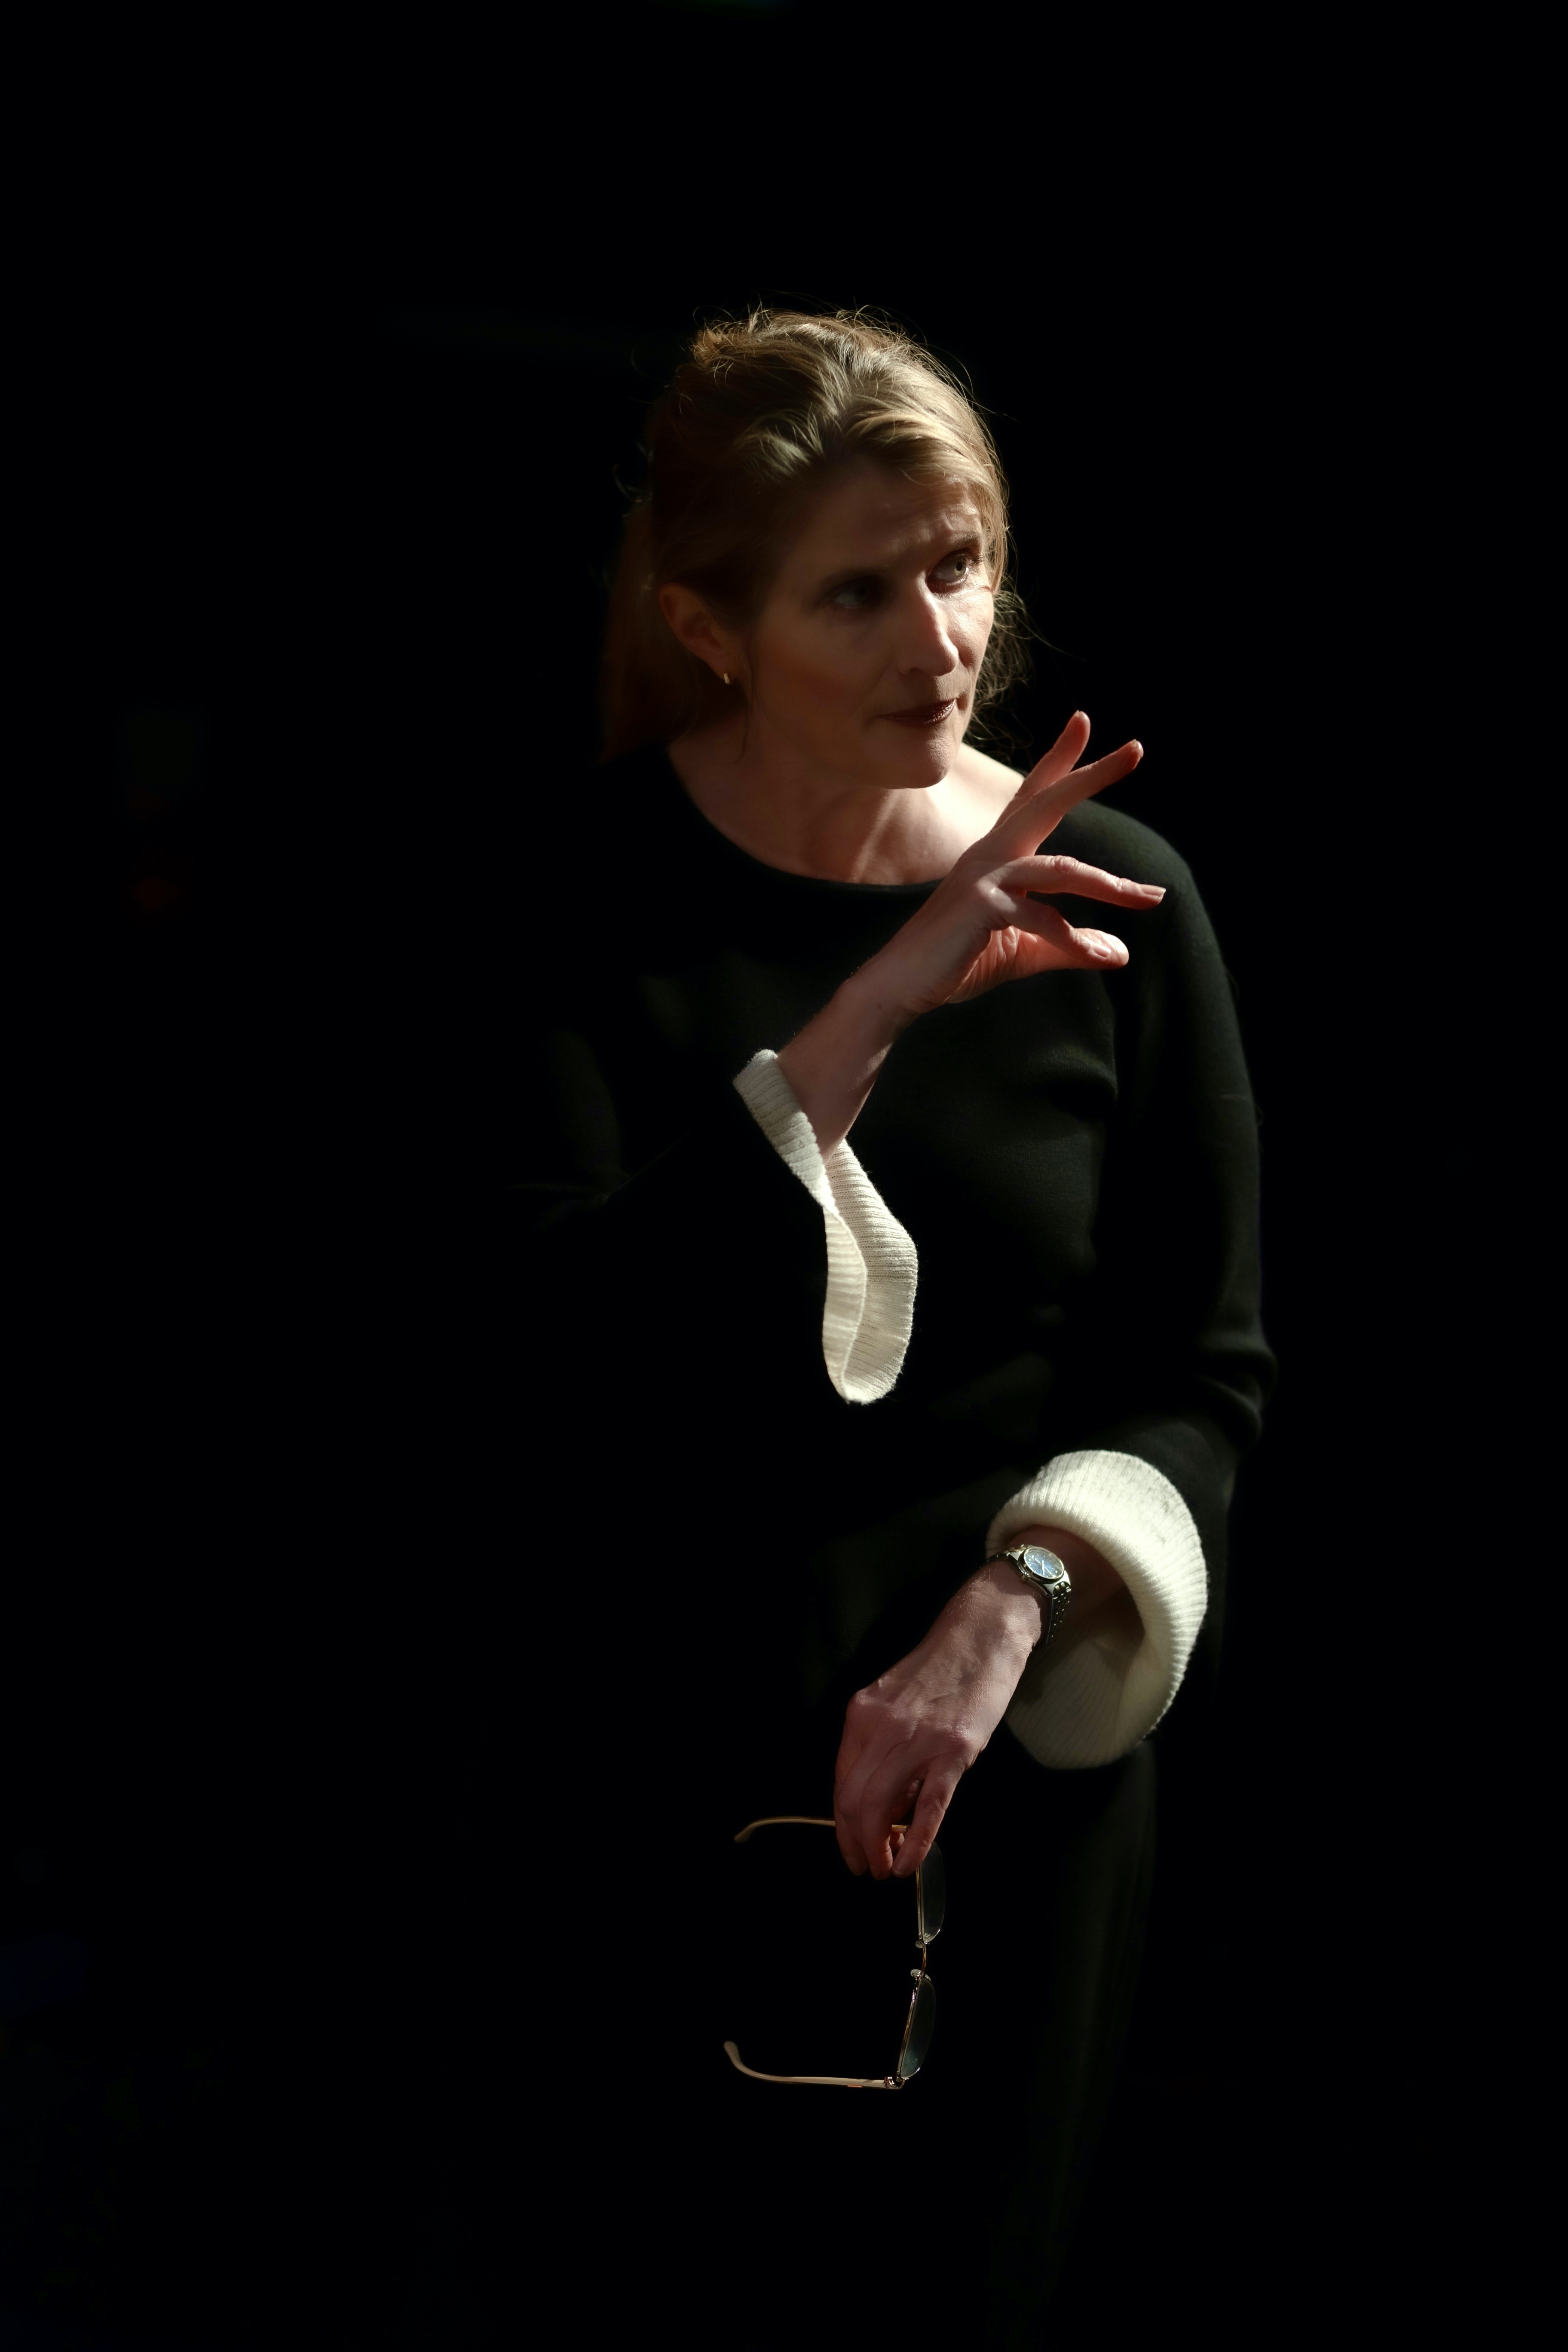 Jude Haste, a white woman lit against a black background, making an expressive gesture with her fingers.